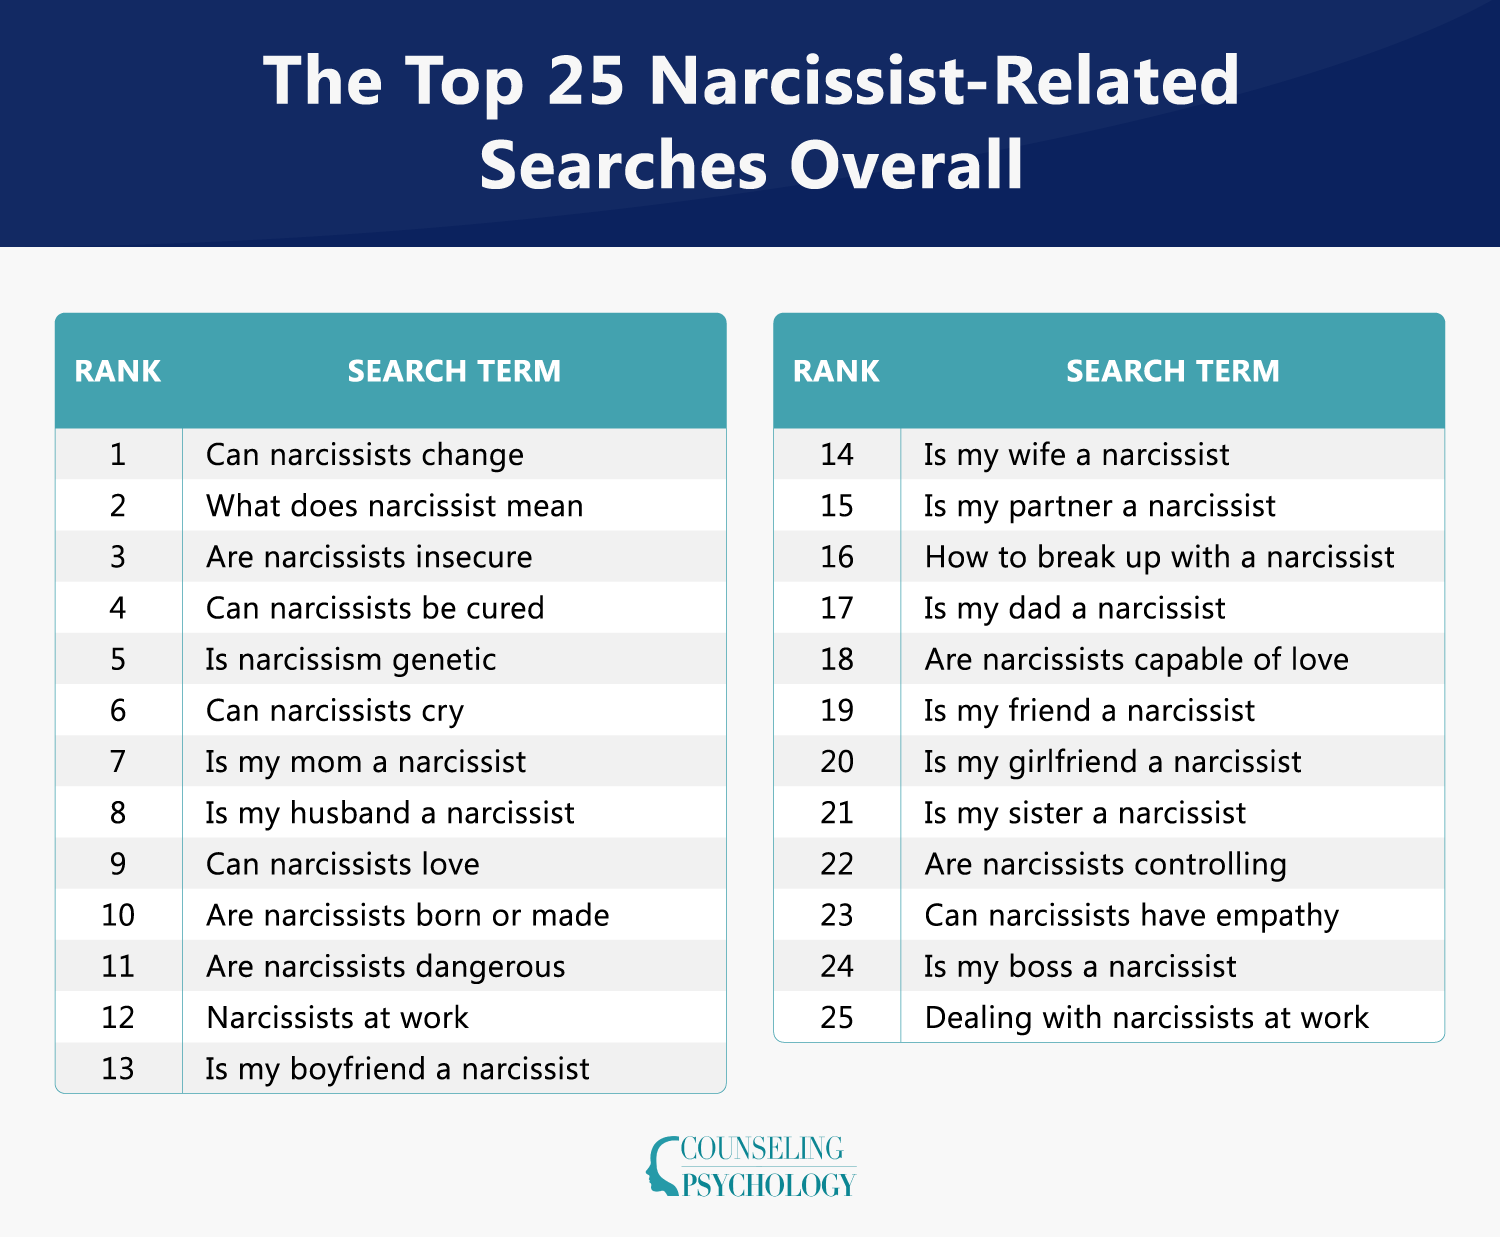 A table showing the most common narcissistic-related searches among Americans in the past year